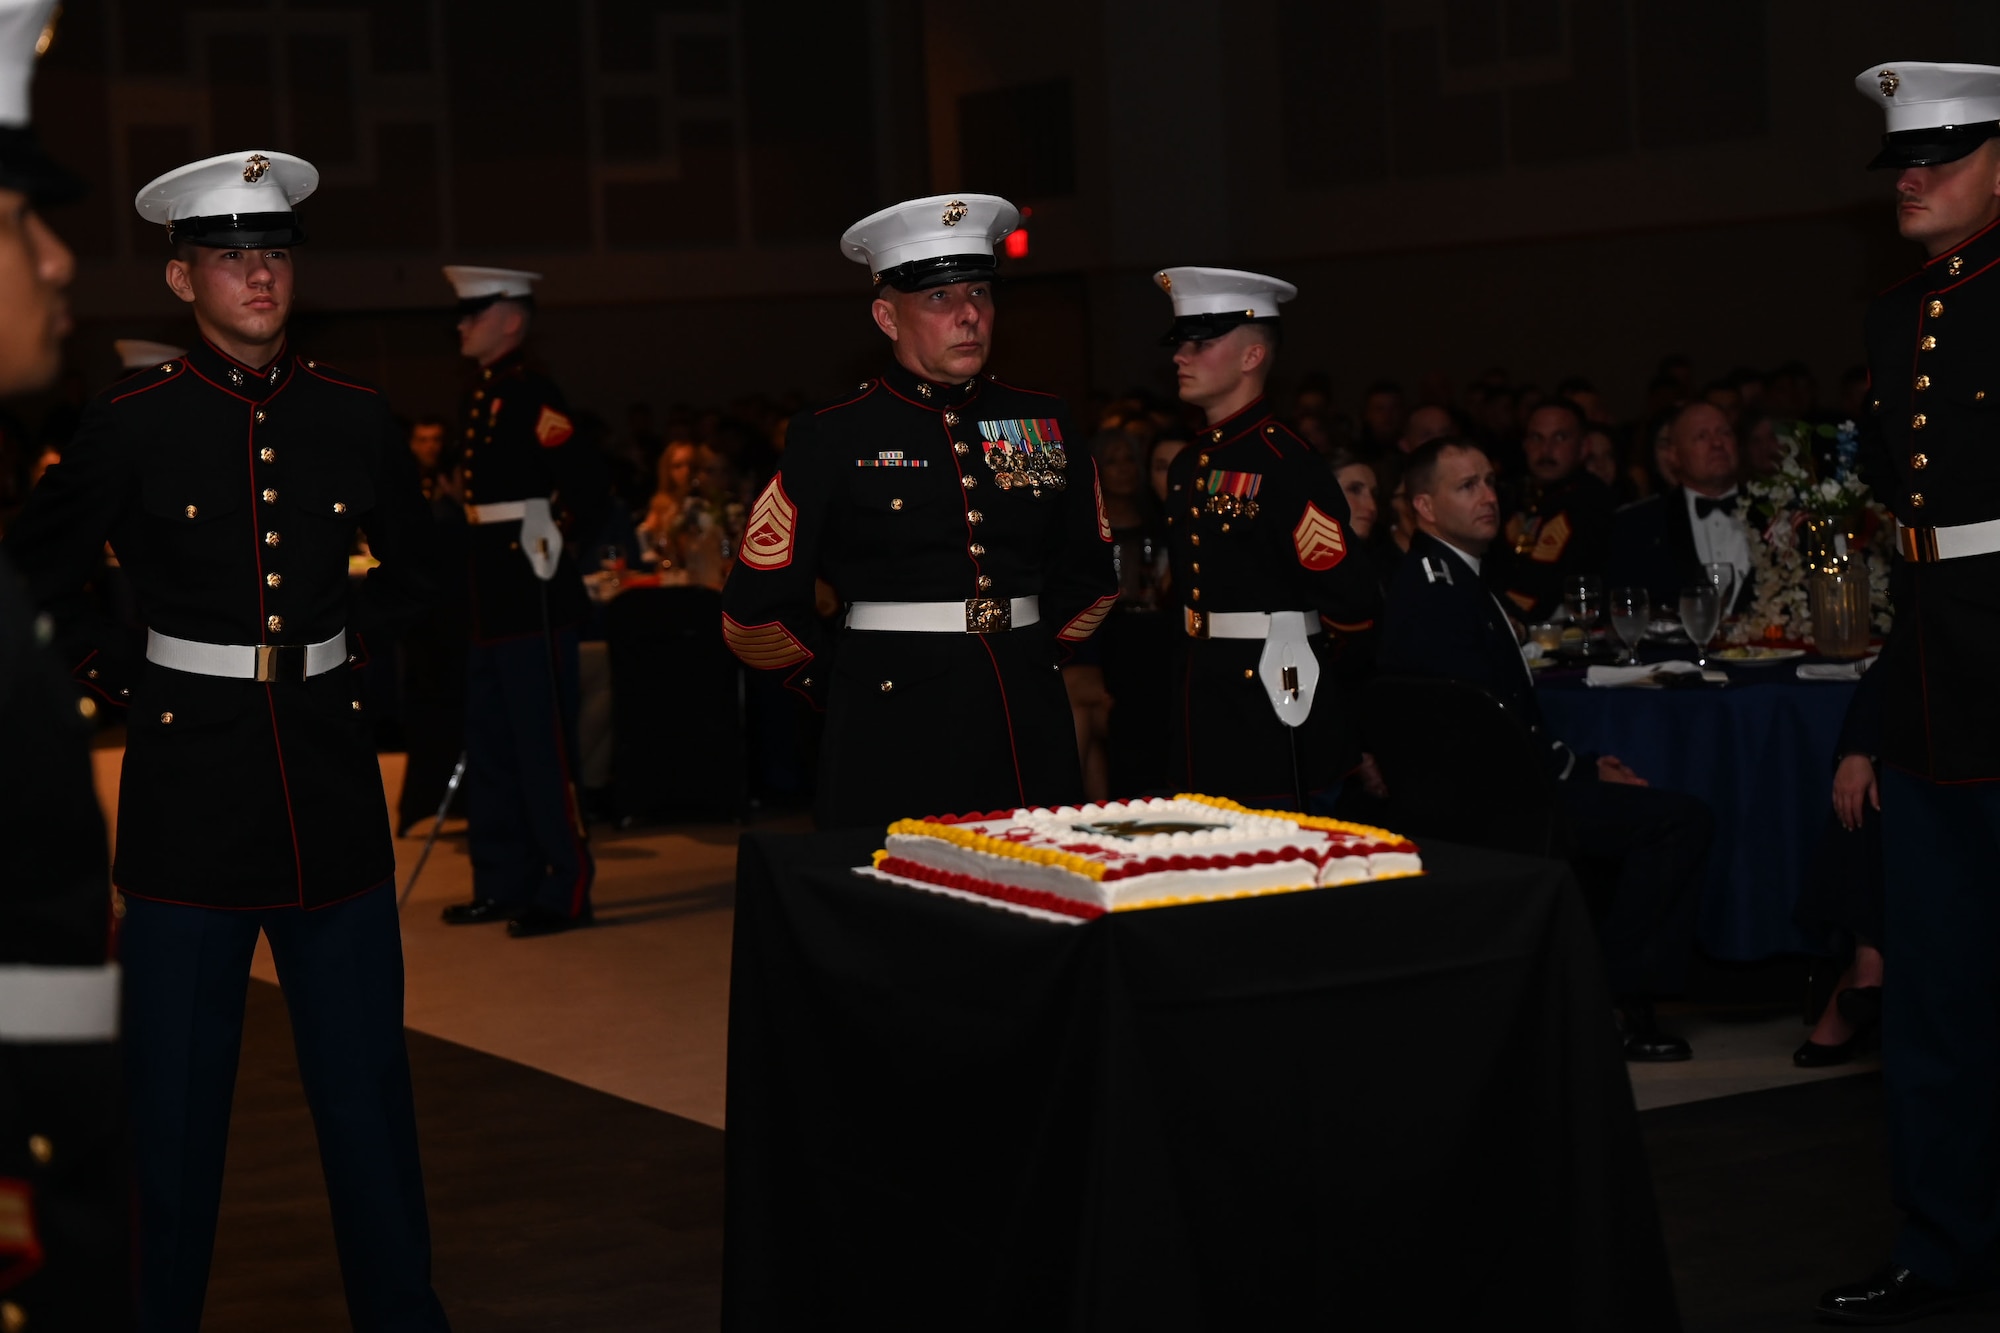 U.S. Marine Corps Gunnery Sgt. Patrick Pullman, center, oldest Marine in attendance, and Pvt. Kenneth Walker, left, youngest Marine in attendance, stand in the center aisle to receive a slice of cake as the youngest and oldest Marine during the 248th Marine Corps Birthday Ball at the McNease Convention Center, San Angelo, Texas, Nov. 10, 2023. The Marine Corps Birthday Ball is a time-honored tradition celebrating past, present, and future Marines. (U.S. Air Force photo by Airman 1st Class Evelyn J. D’Errico)